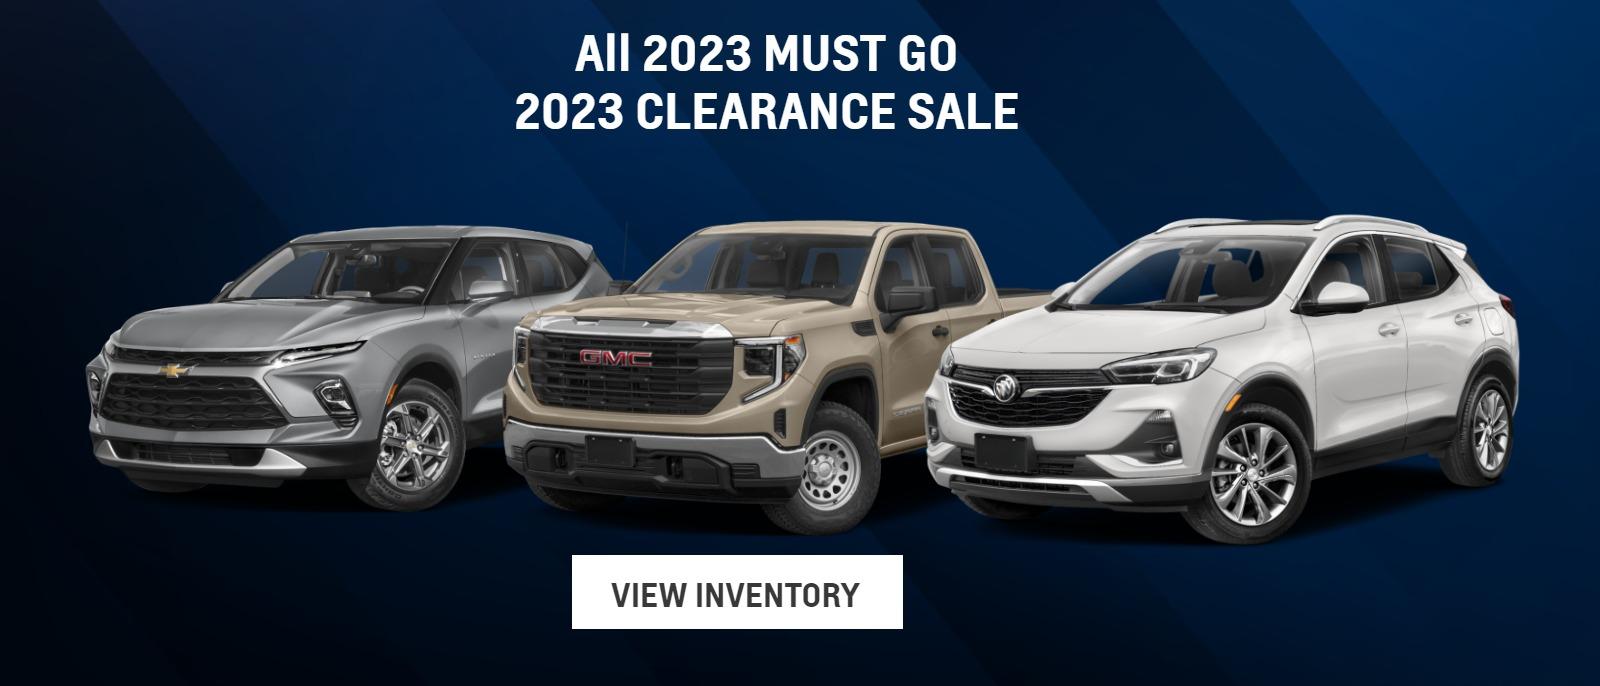 All 2023 MUST GO

2023 CLEARANCE SALE